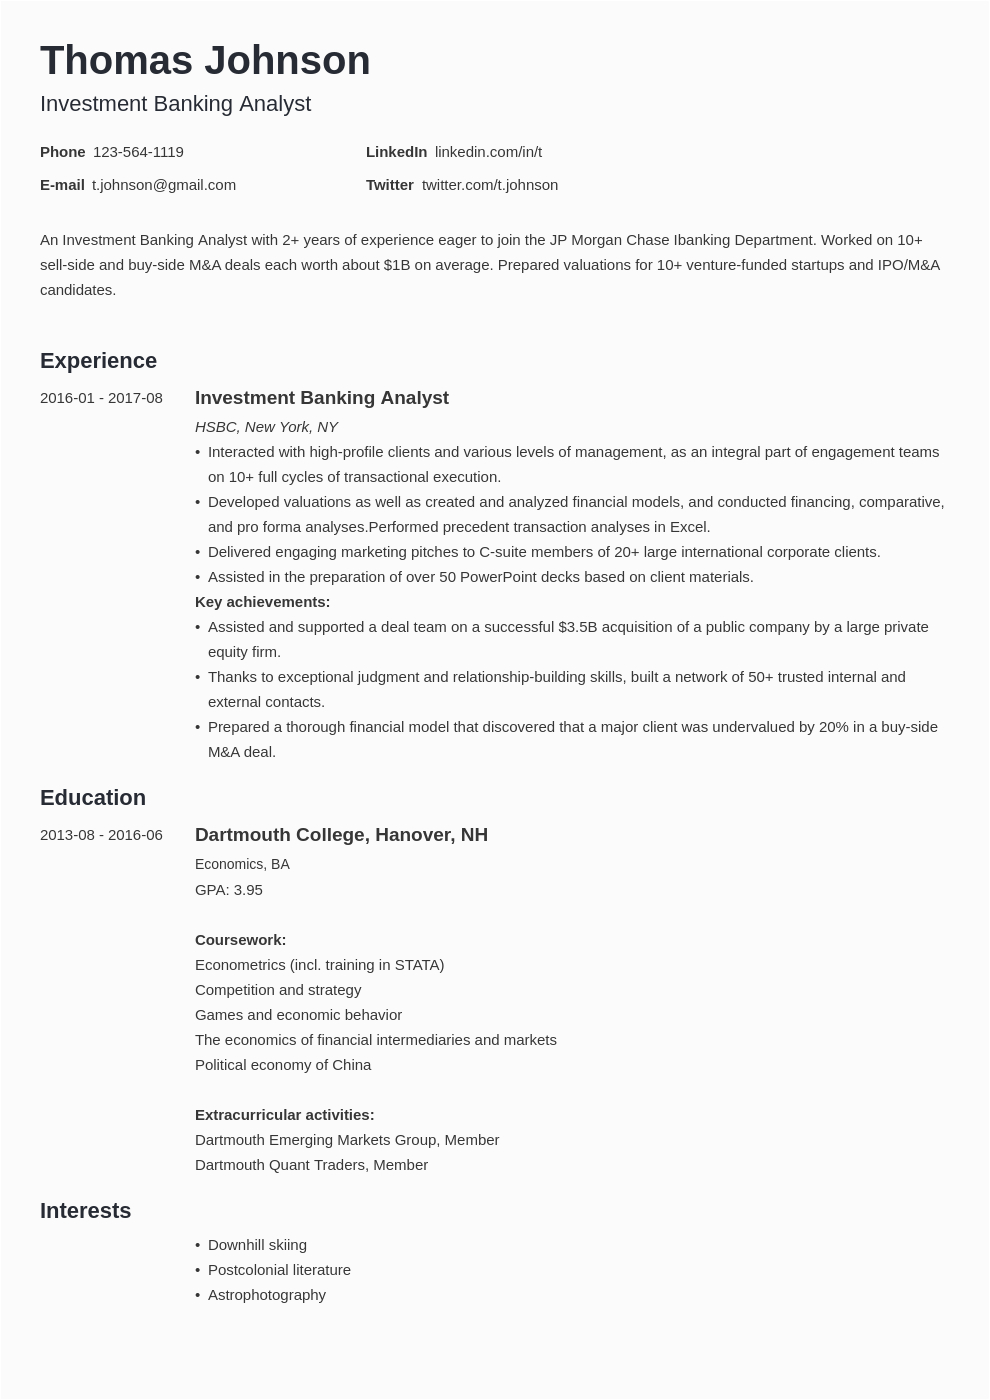 Sample Resume Of An Investment Banker Investment Banking Resume Template & Guide [20 Examples]